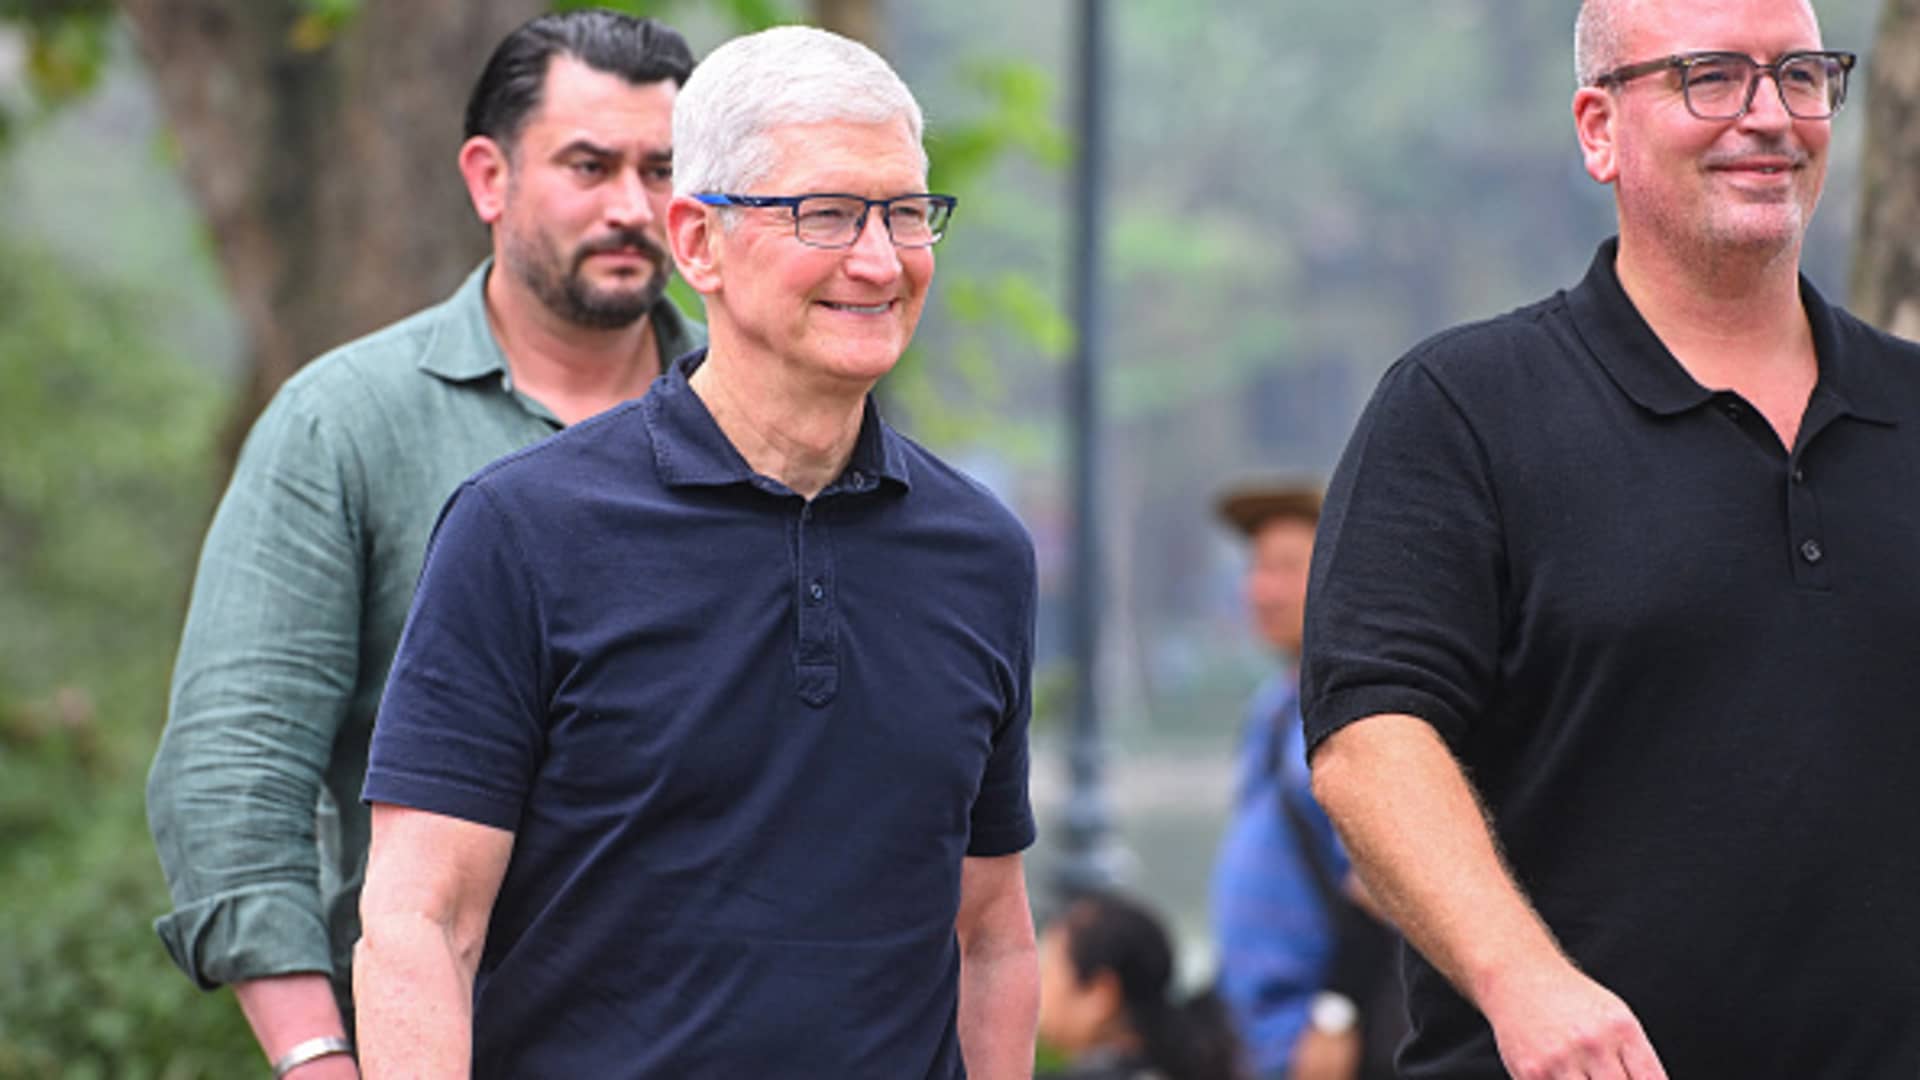 Apple CEO Tim Cook visits Vietnam — one of the iPhone giant's most important manufacturing hubs